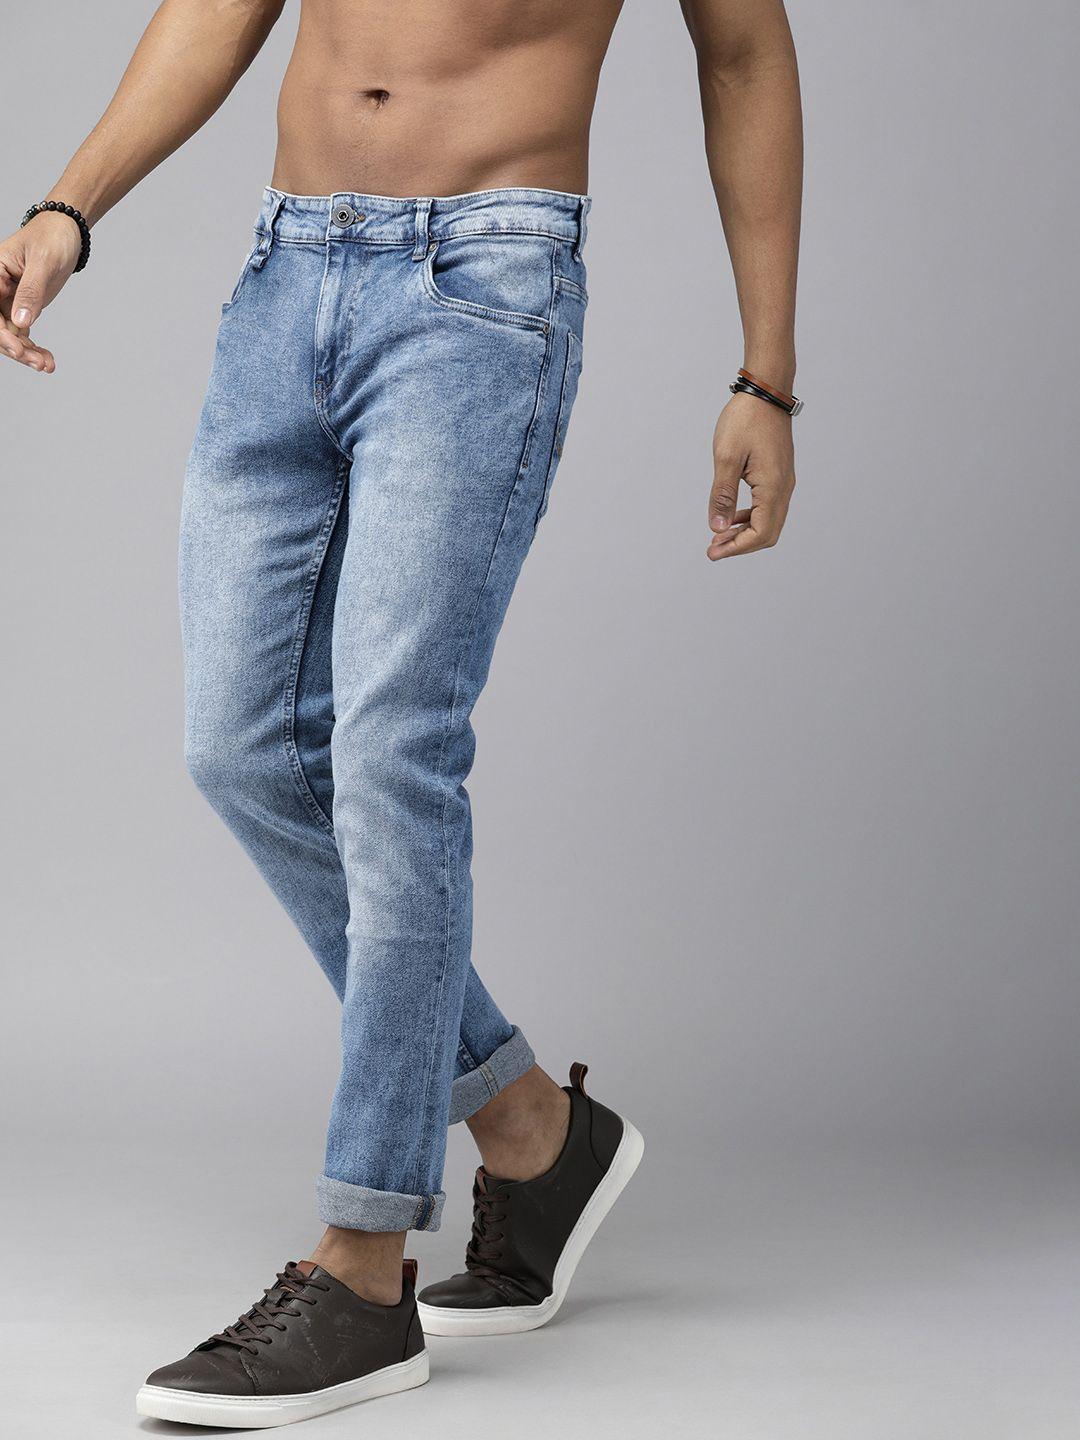 roadster-men-blue-skinny-fit-low-rise-clean-look-heavy-fade-stretchable-jeans